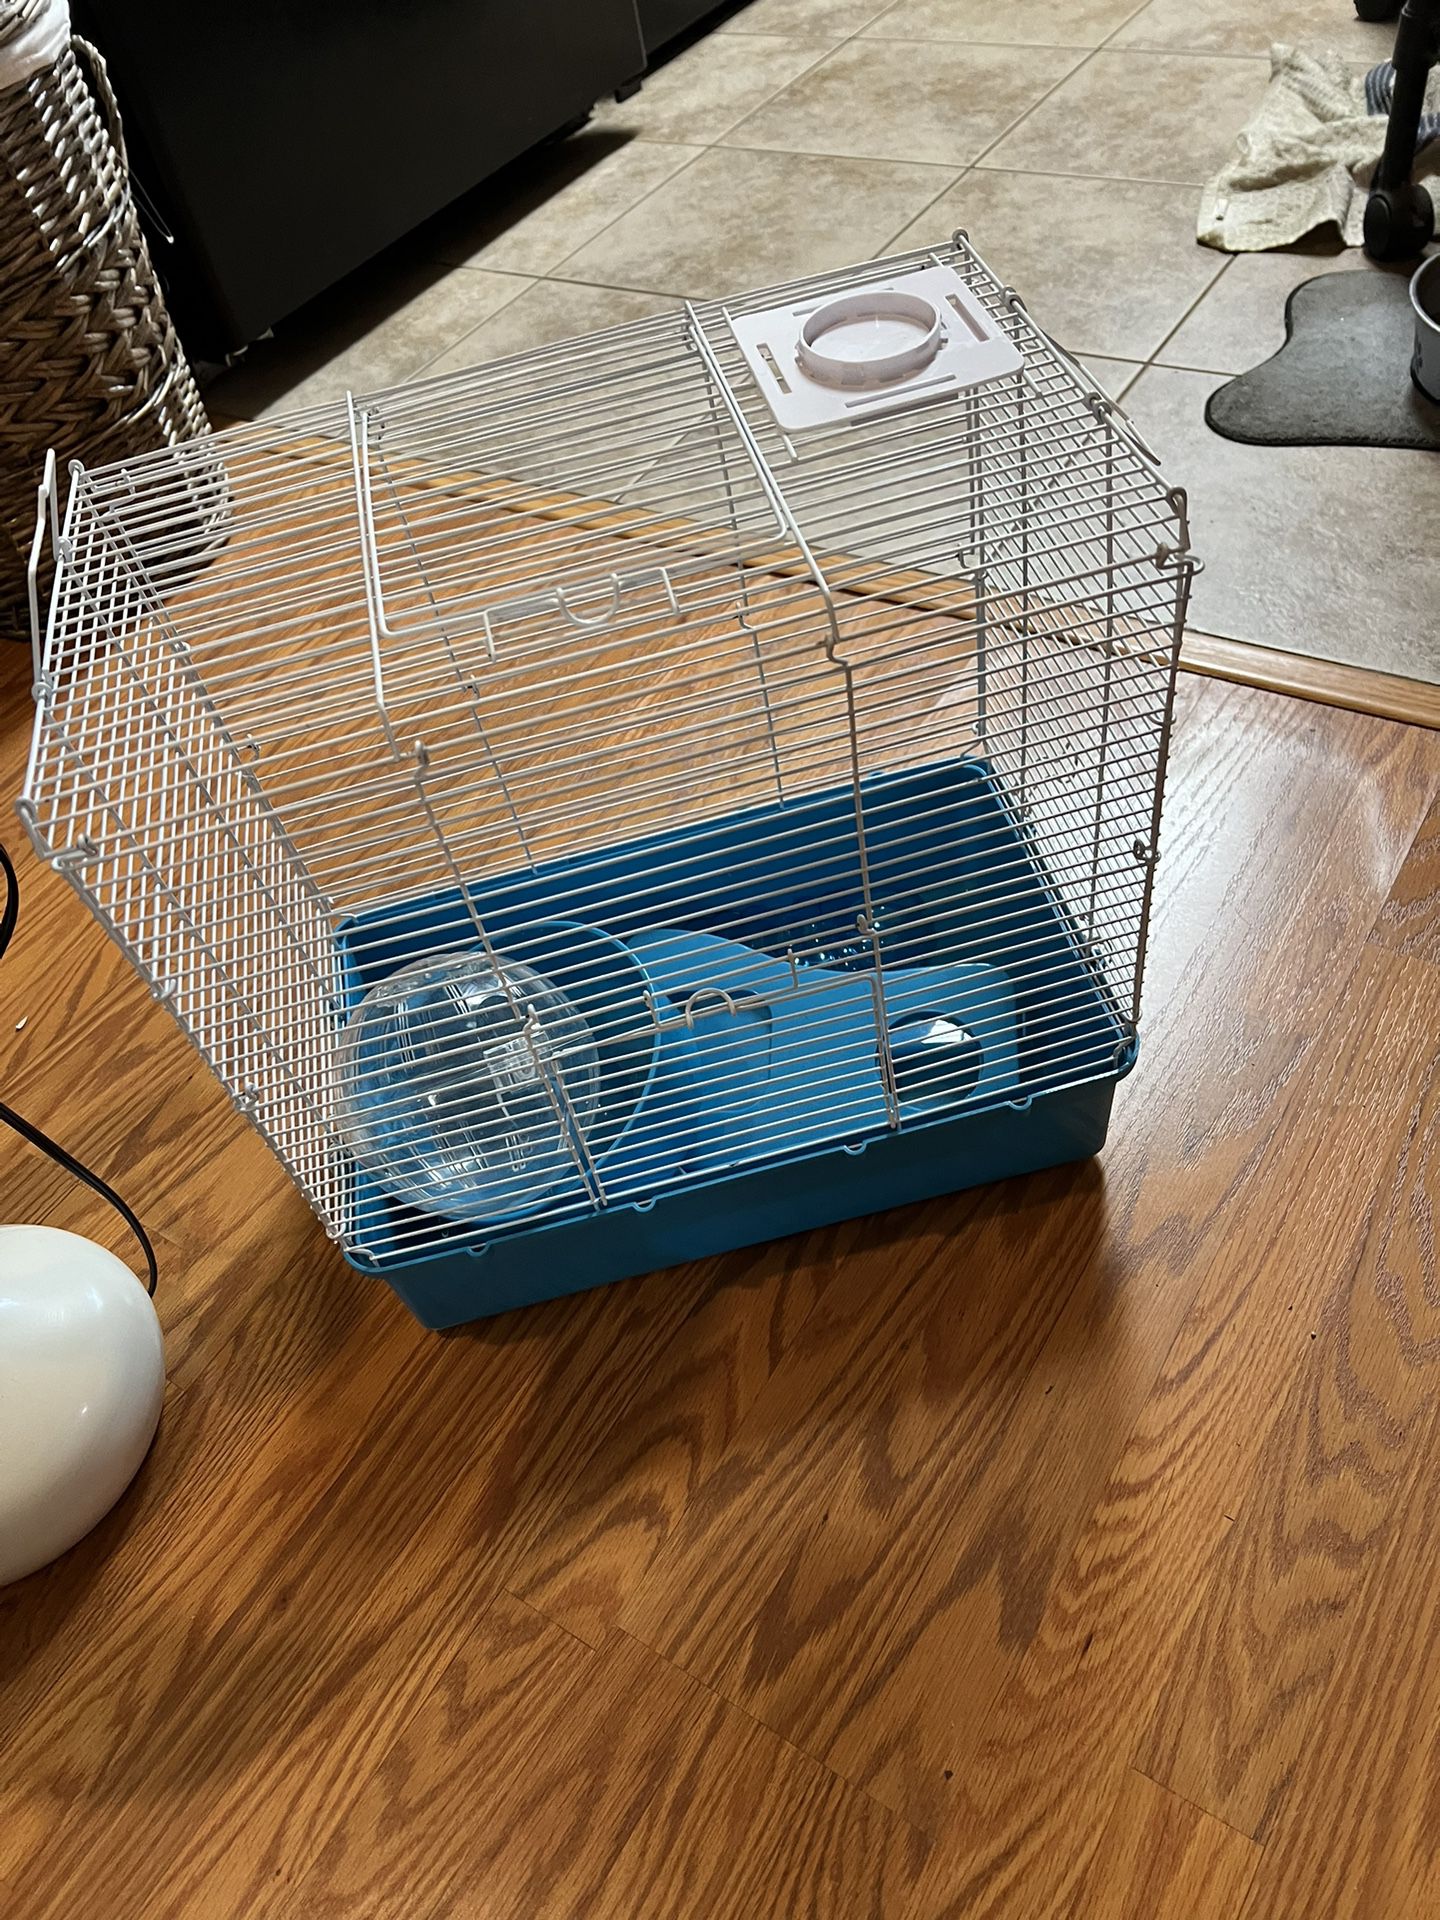 Small Animal Cage With Wheel And Few Accessories 